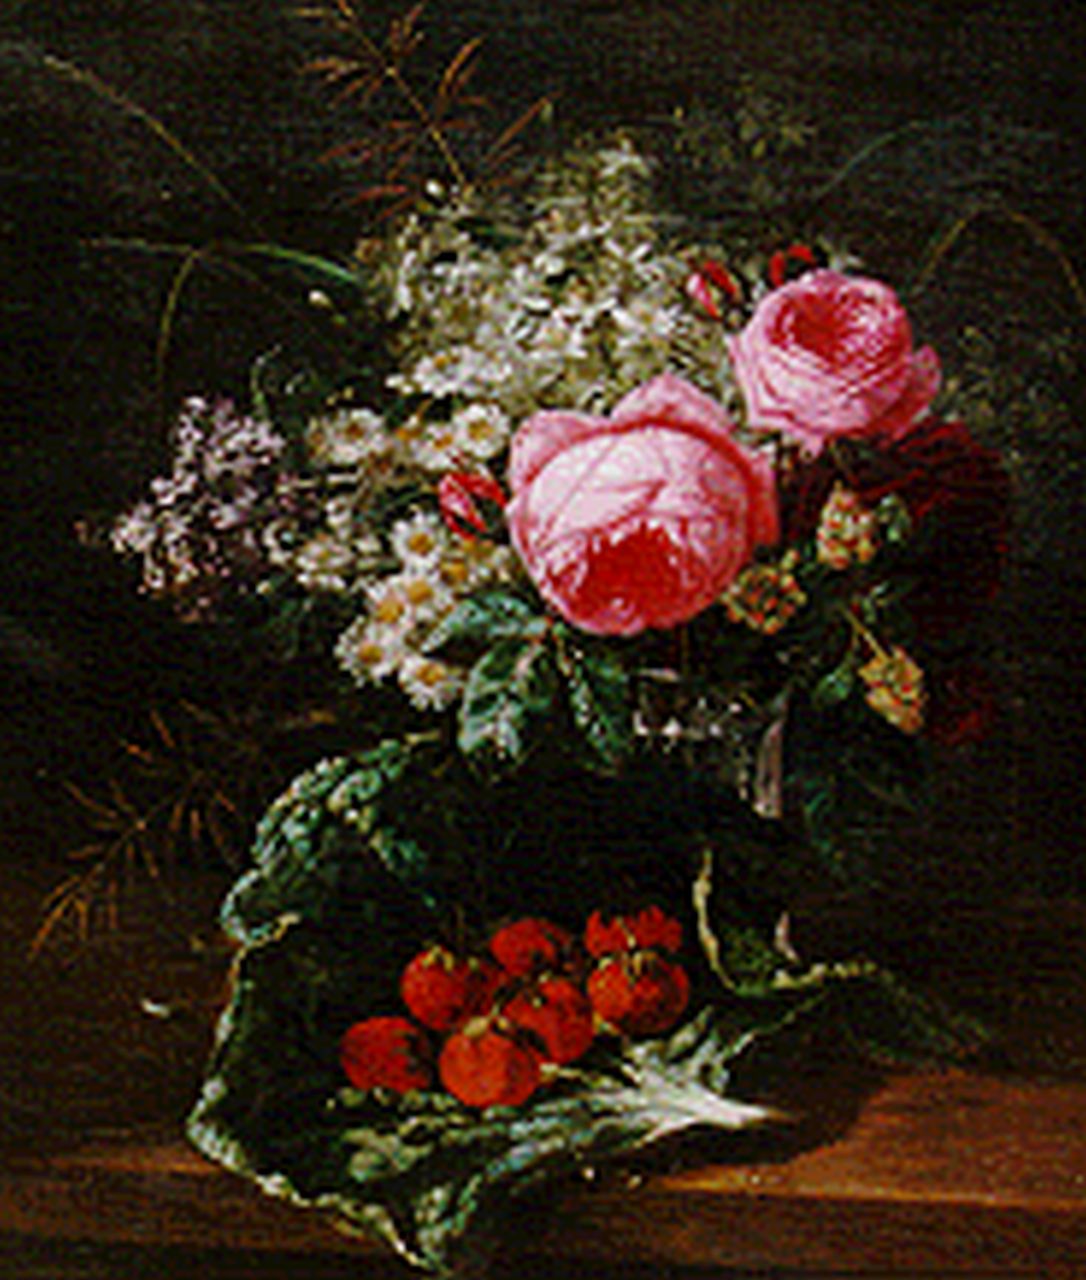 Huygens F.J.  | 'François' Joseph Huygens, A still life with peonies and strawberries, oil on canvas 50.7 x 44.0 cm, signed l.r.